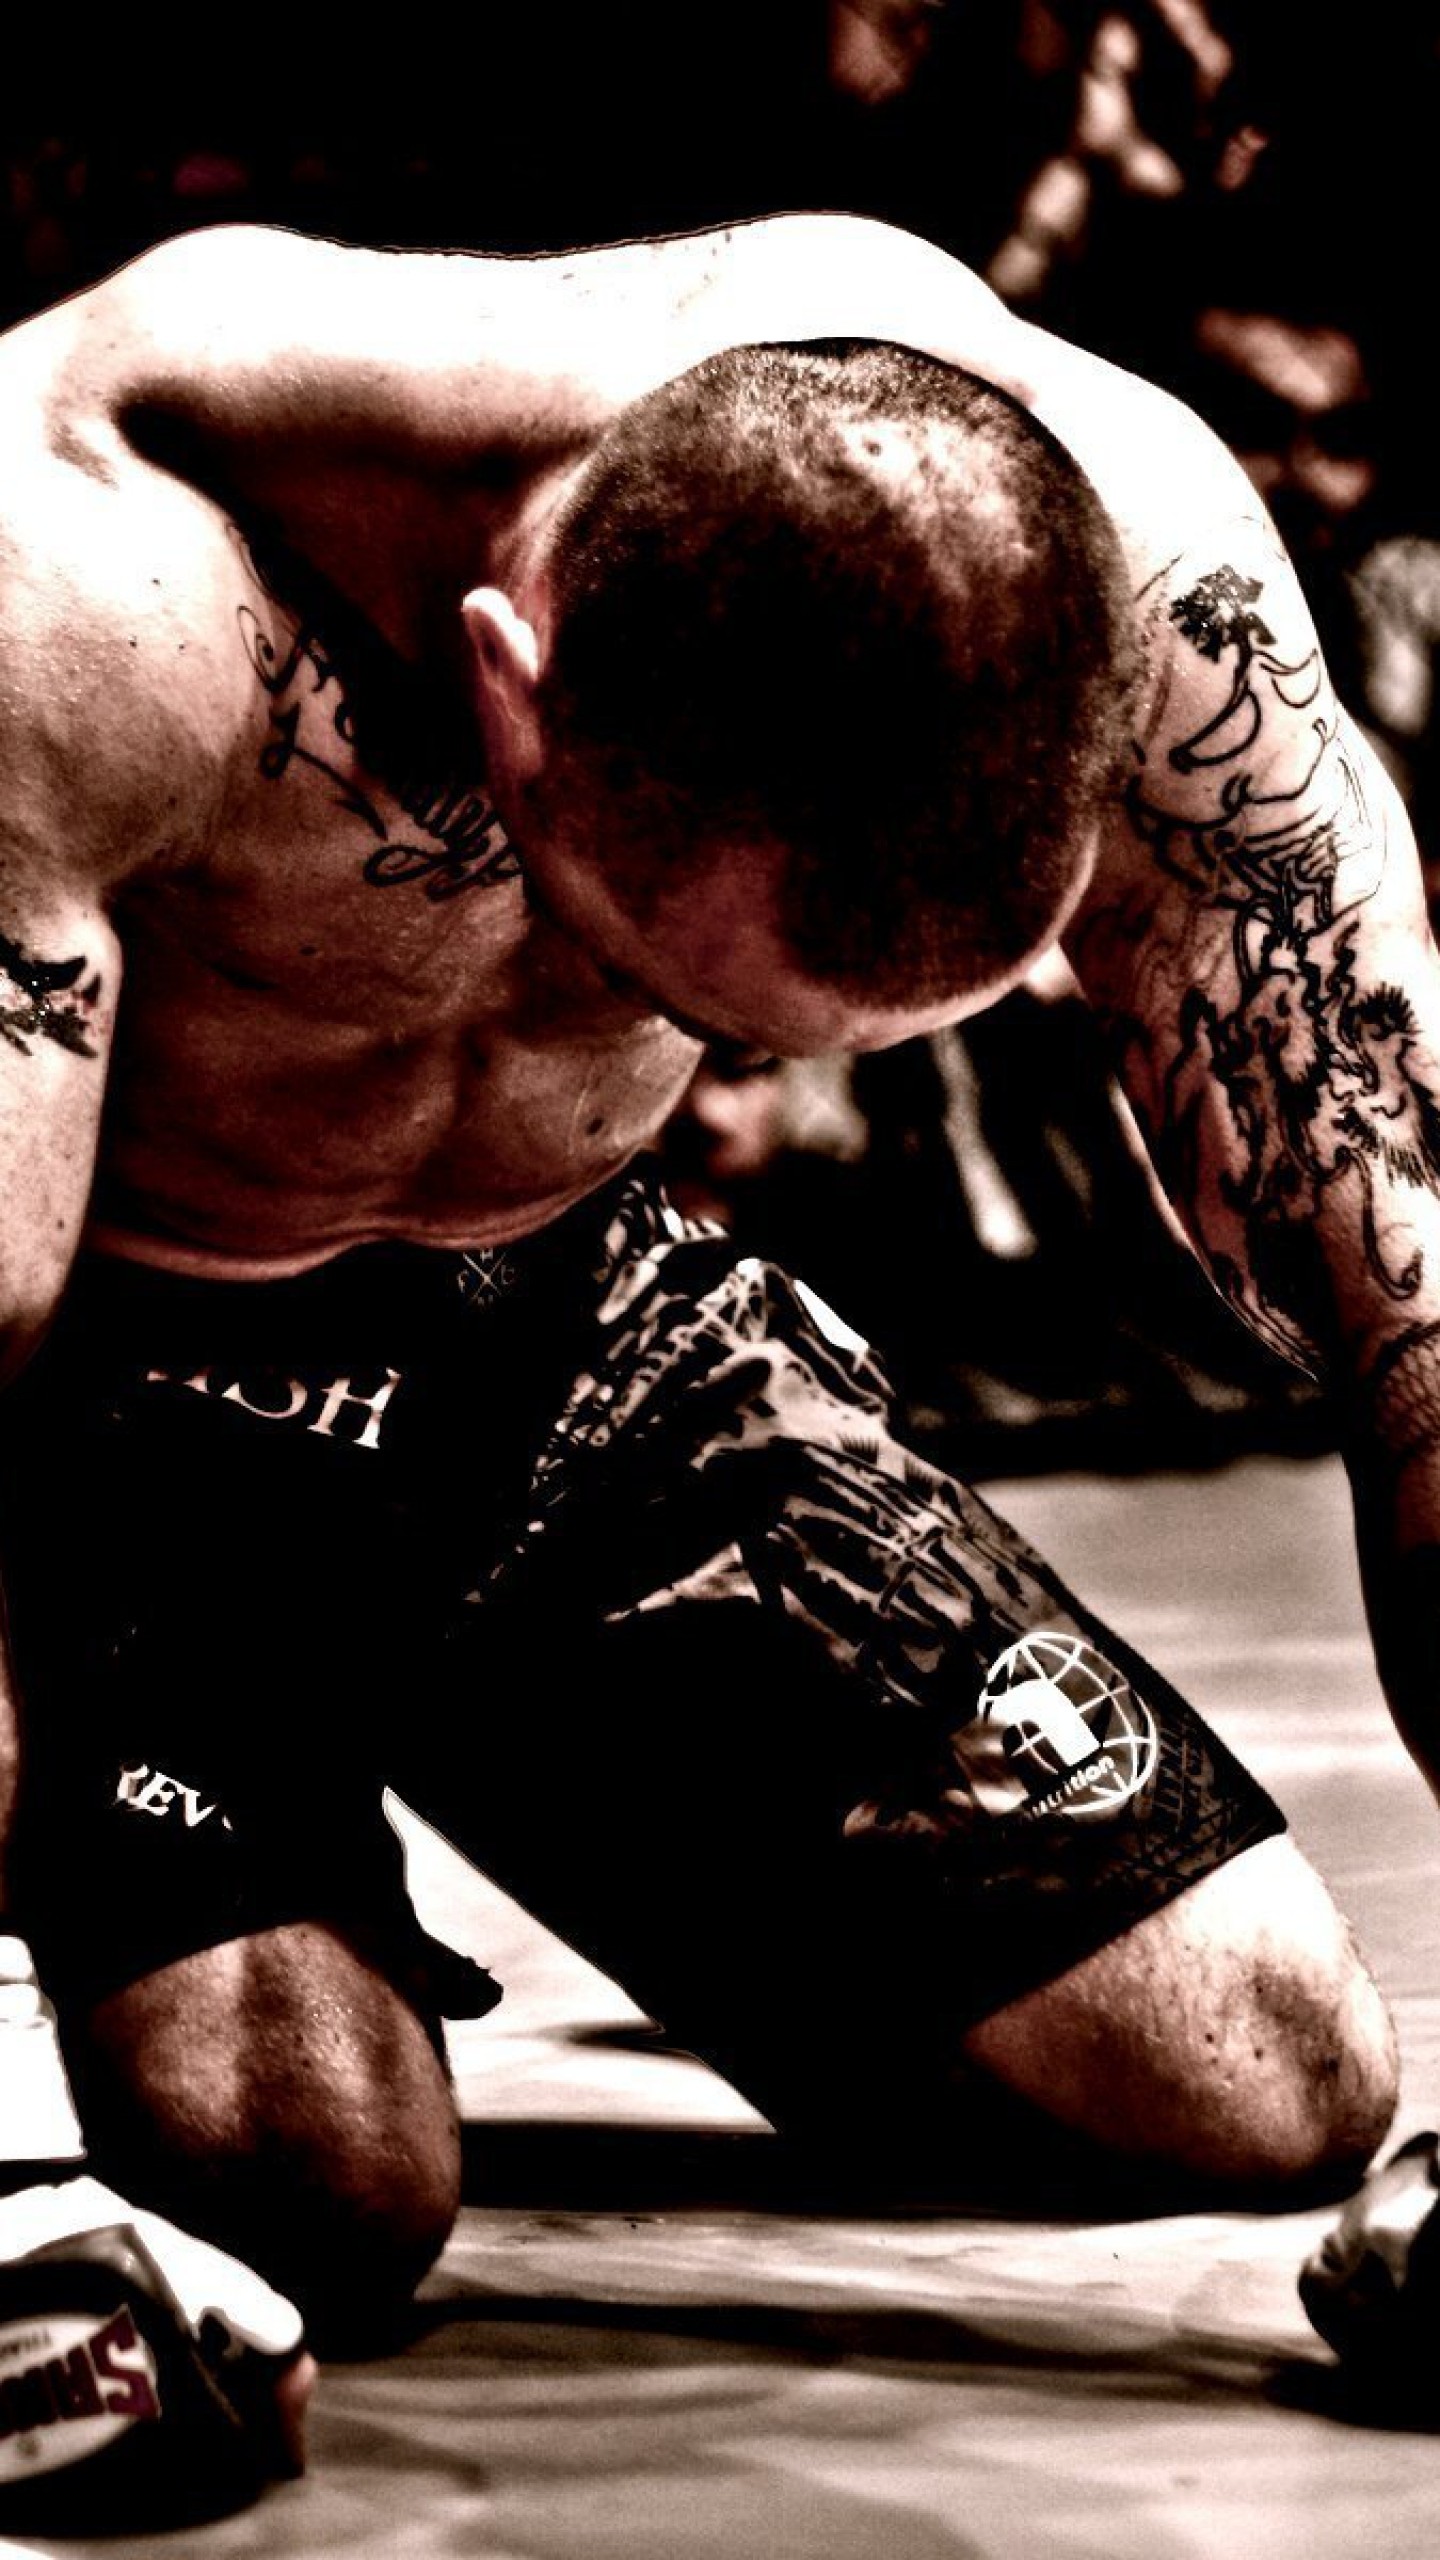 mma fighter wallpaper,arm,muscle,individual sports,shootfighting,physical fitness